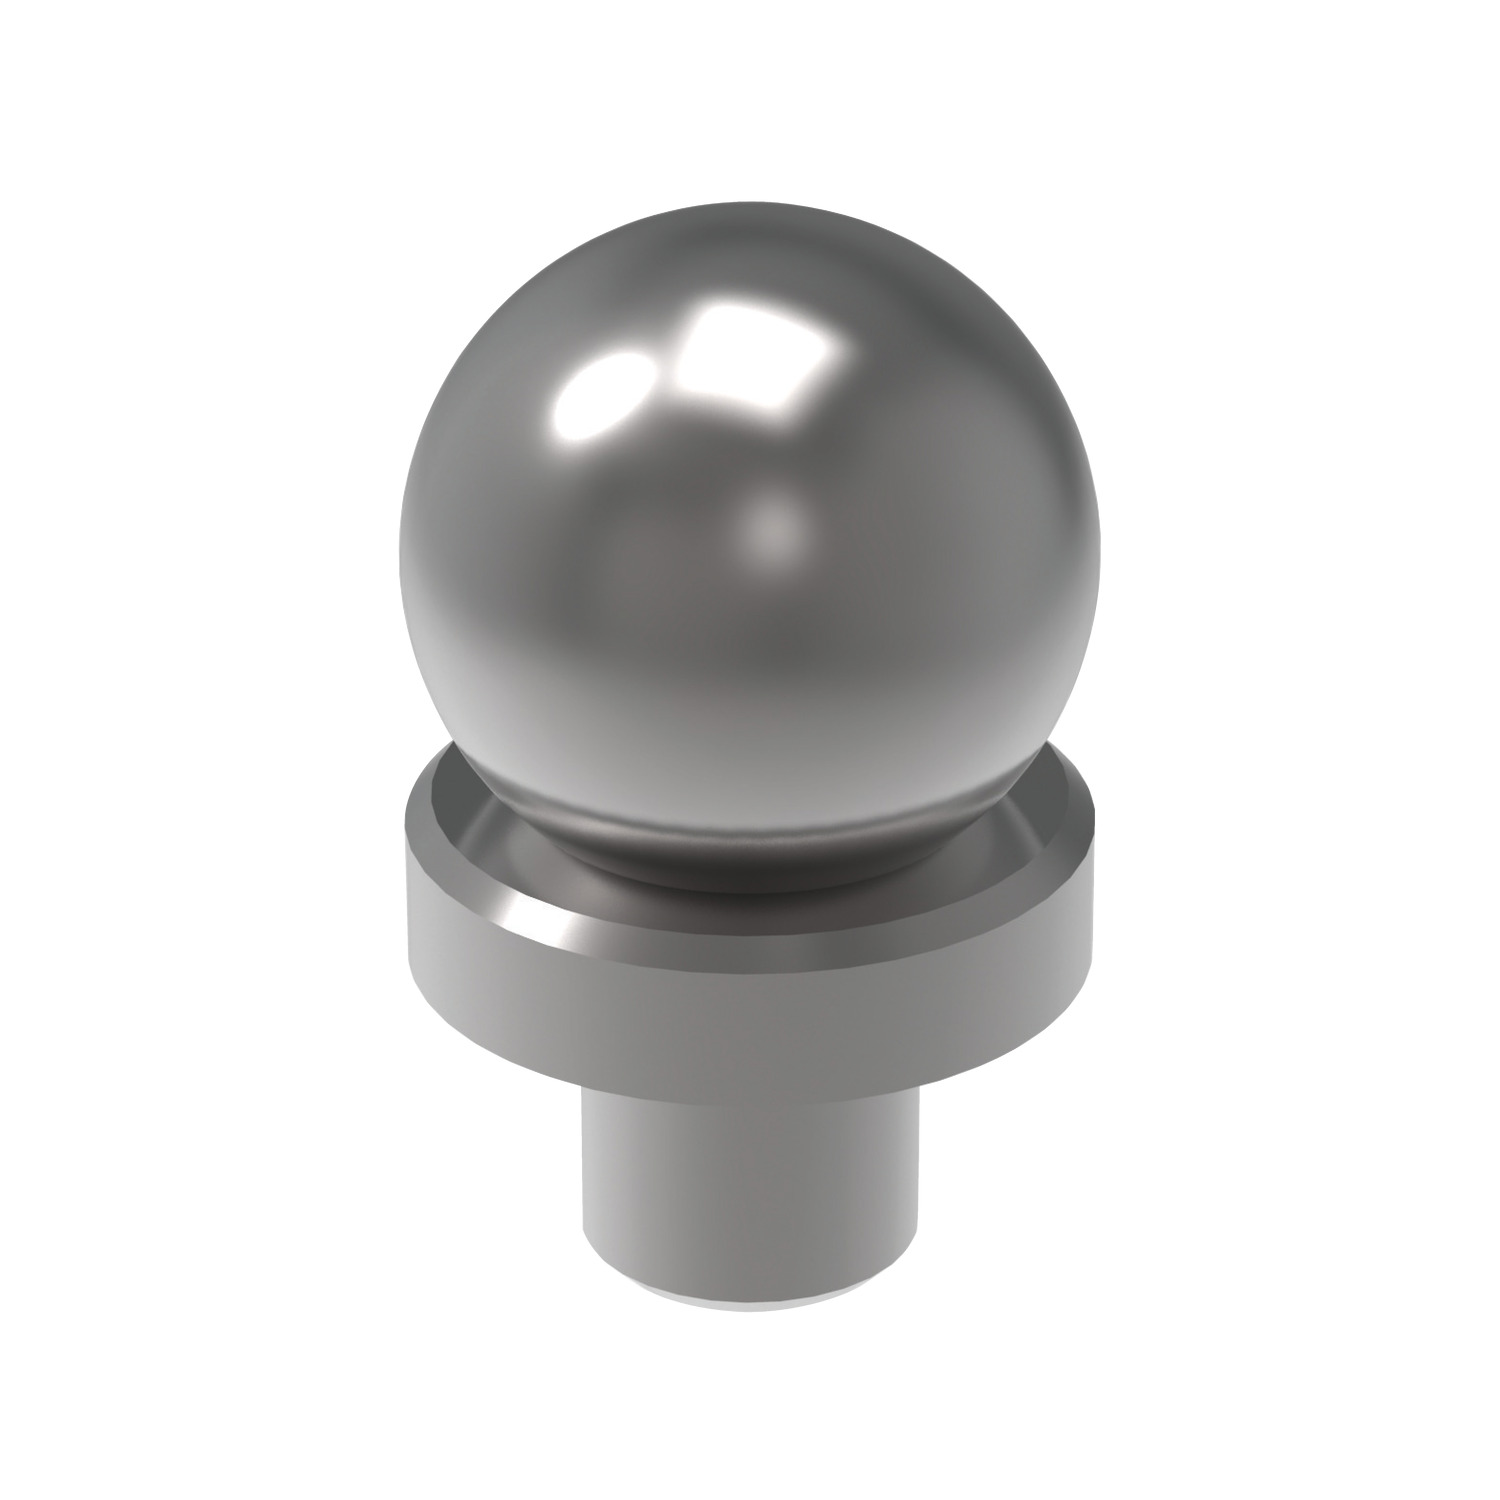 20500.W0050I Inspection Balls - Imperial - Steel. 0,5000 - 0,2497 - 0,63 - 0,3125